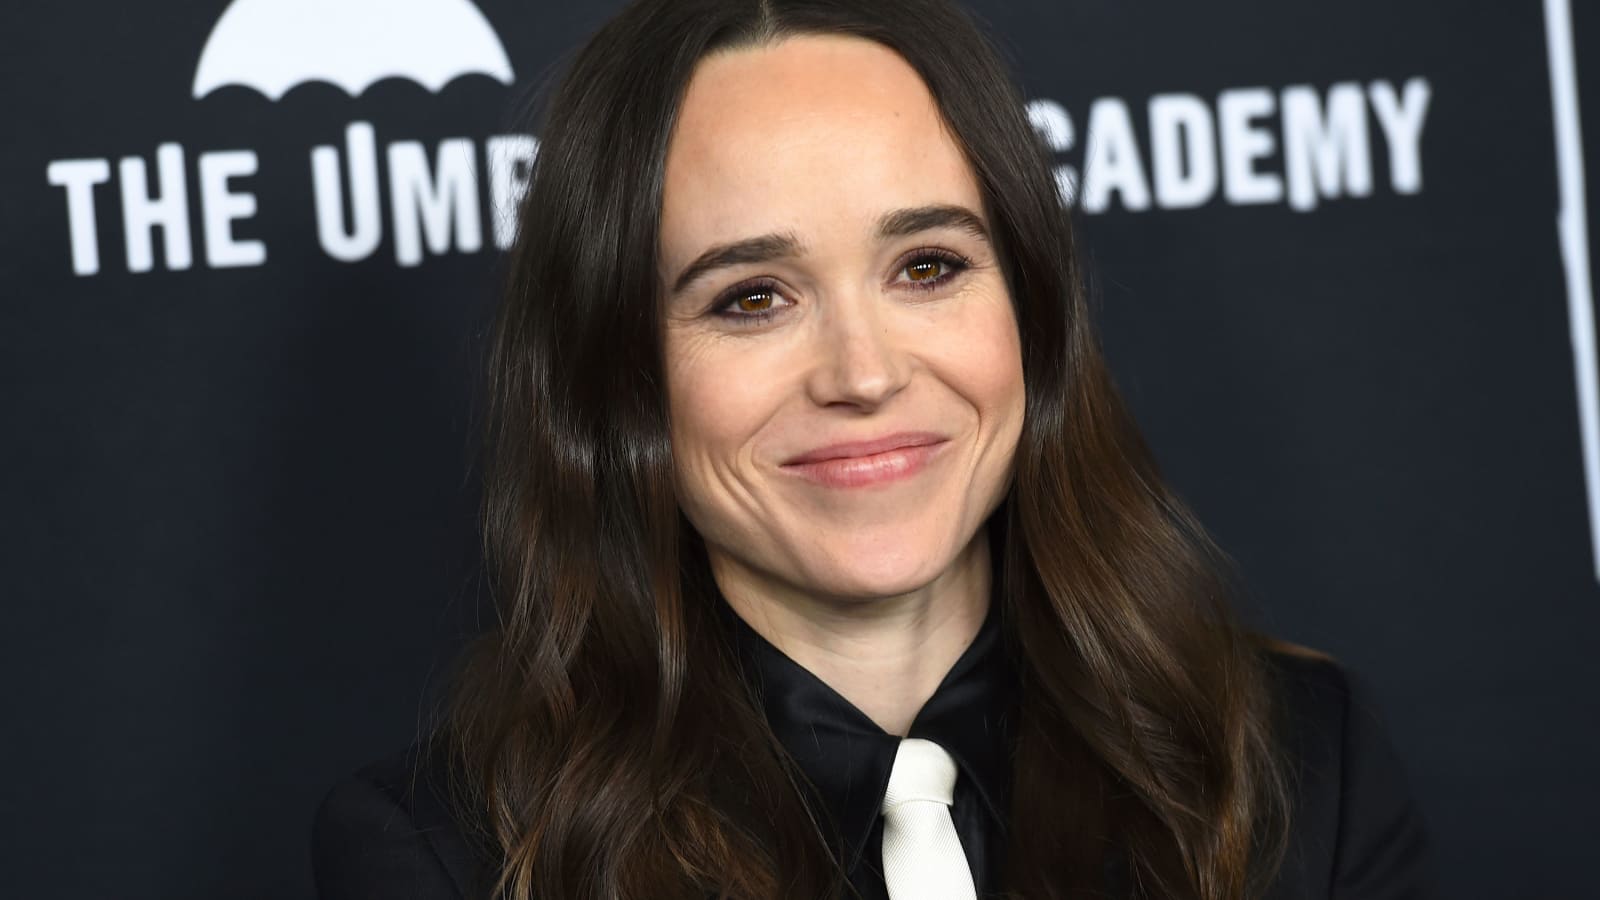 Actor Page, Star Of 'Juno' And 'Umbrella Academy,' Comes Out As Transgender